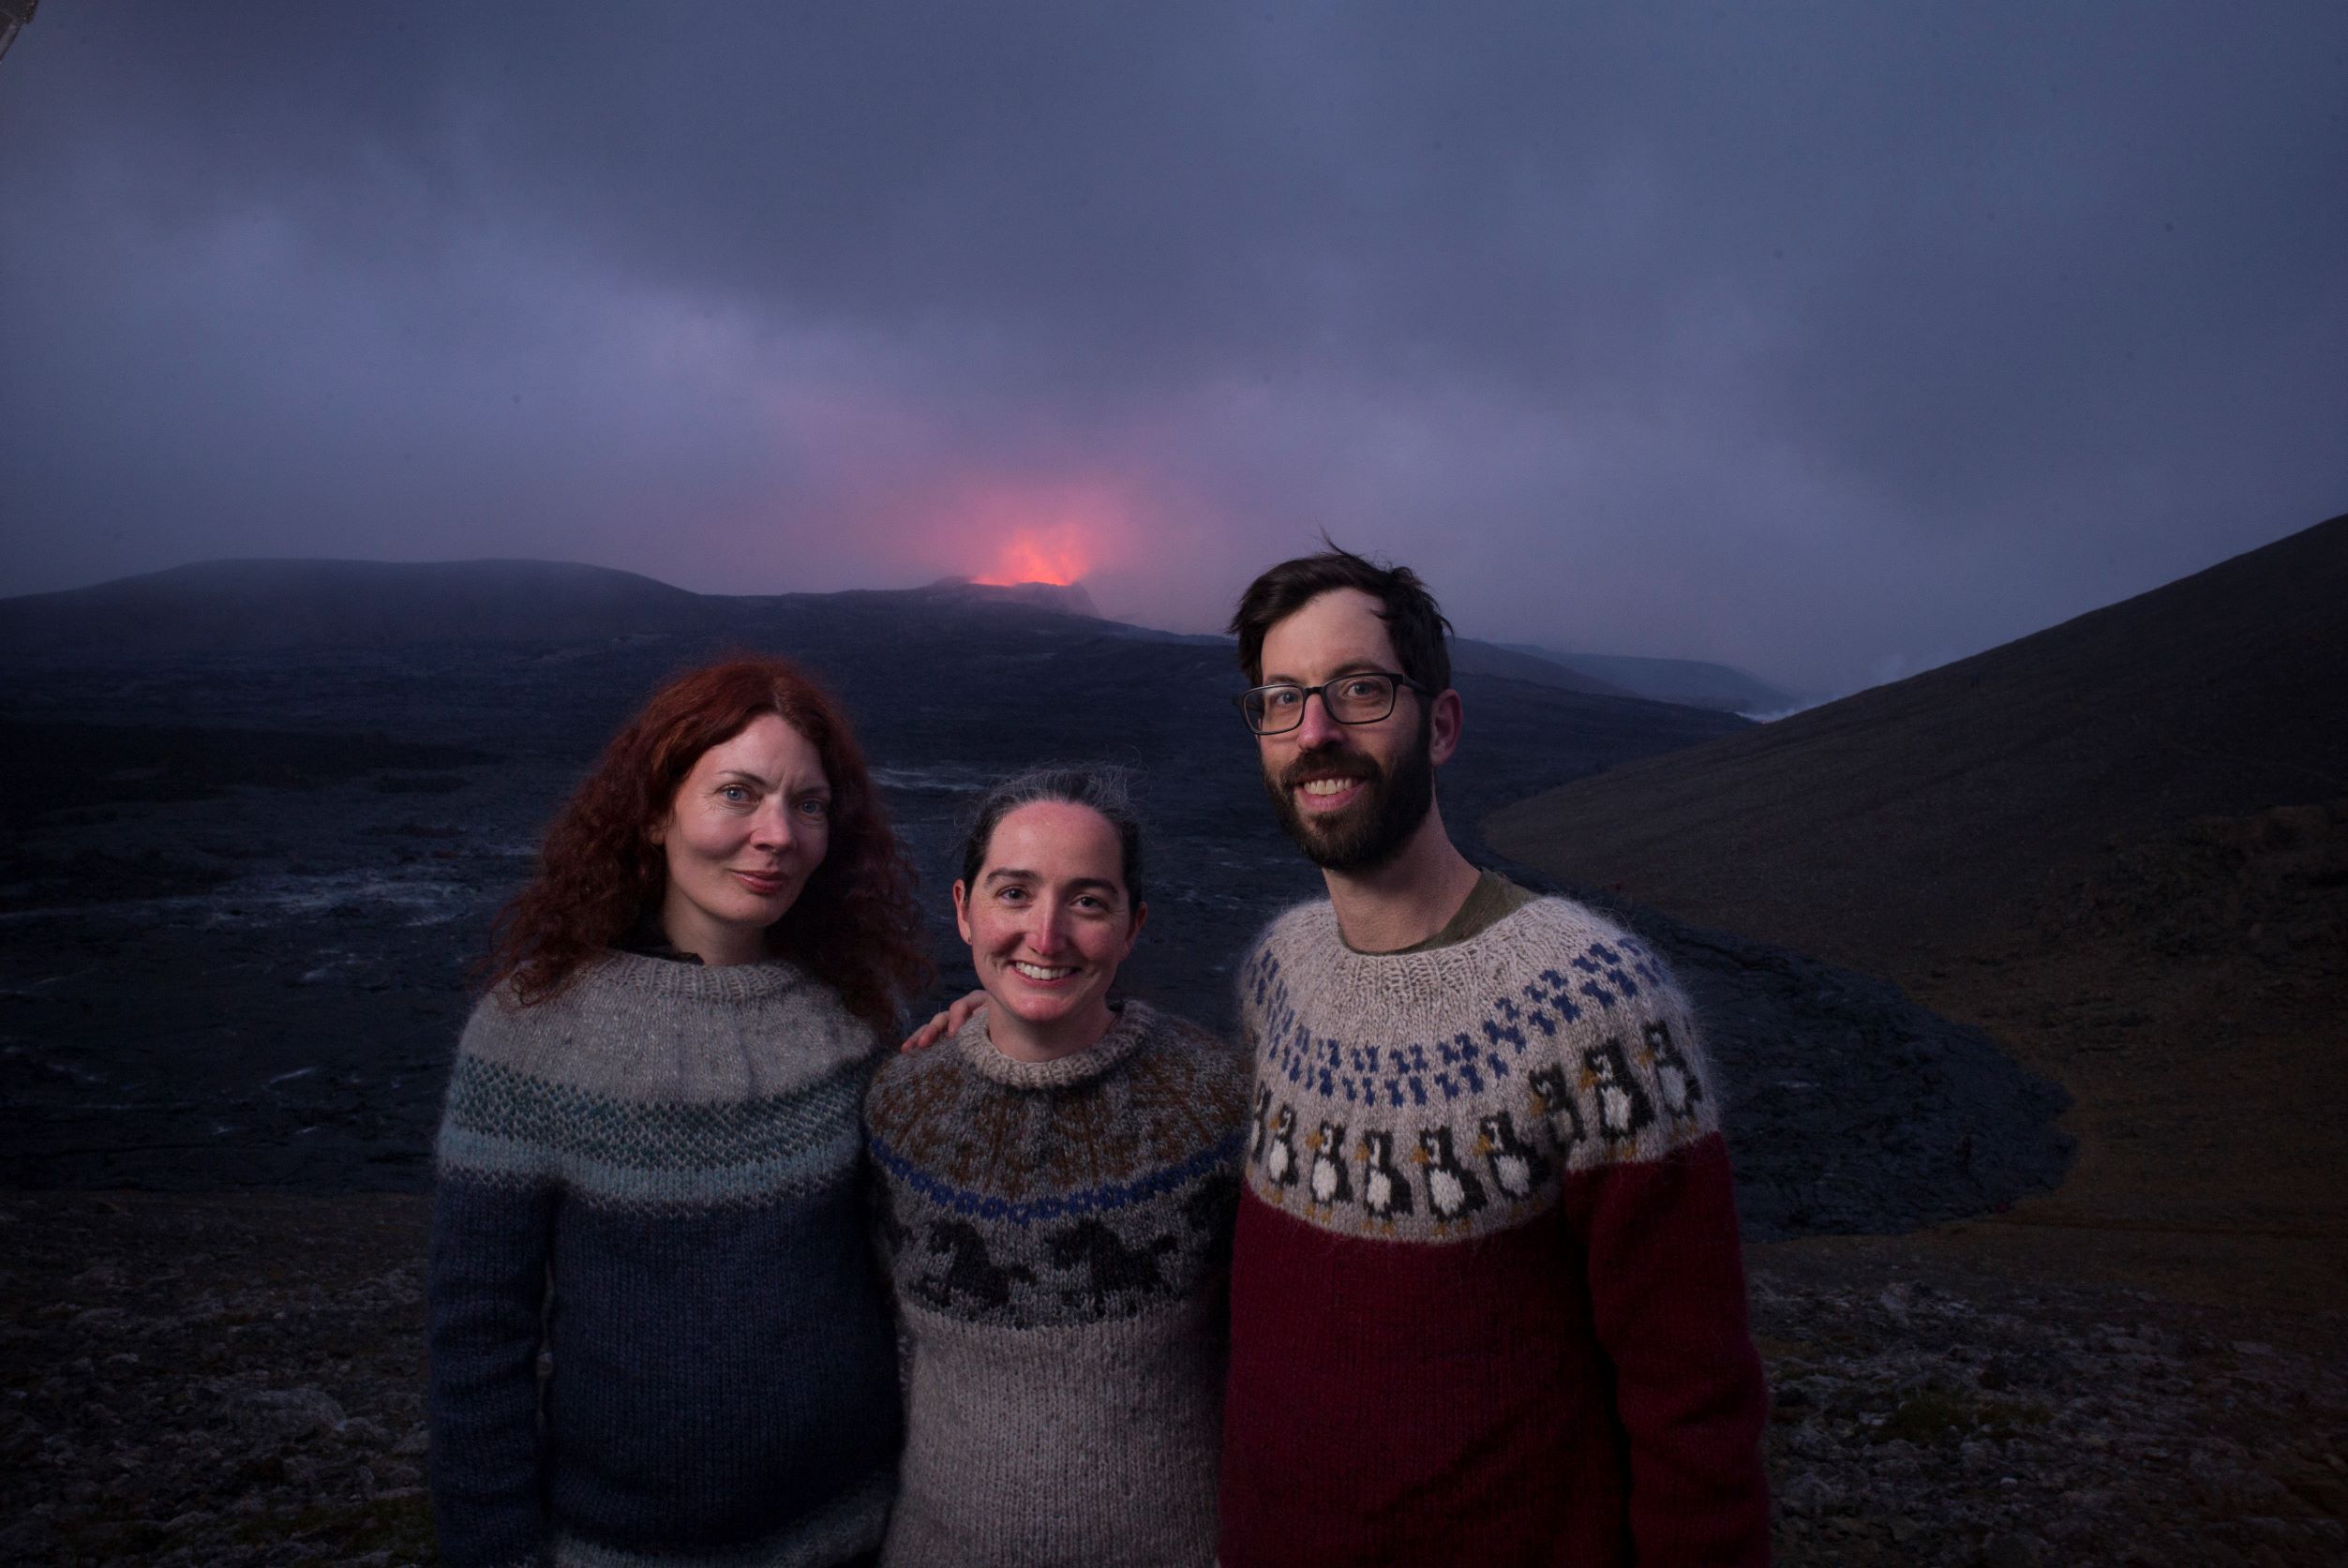 Three people - a man and two women - are all wearing handkniited sweaters, and stand in the foreground while in the distance the Fagradallsfjall volcano is erupting